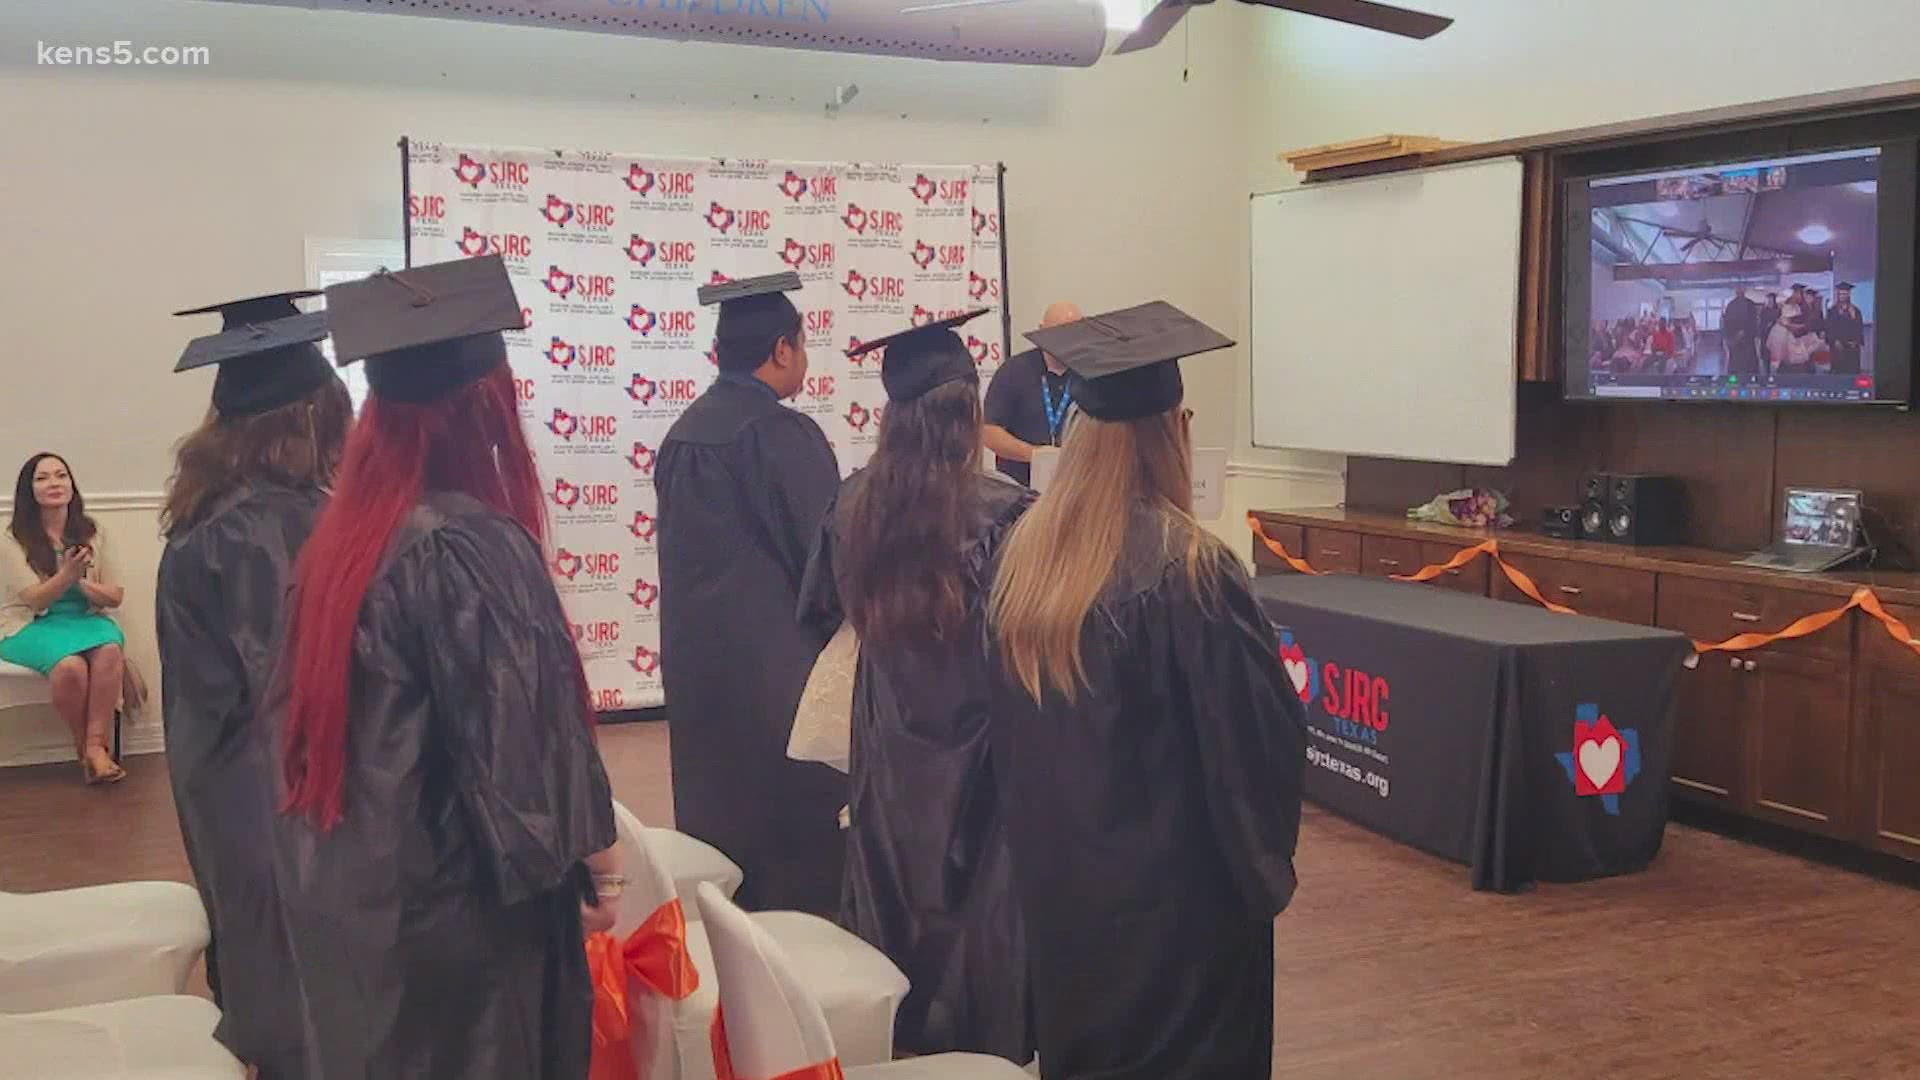 A special group of students got their diplomas after early life hardships that most don't have to face.